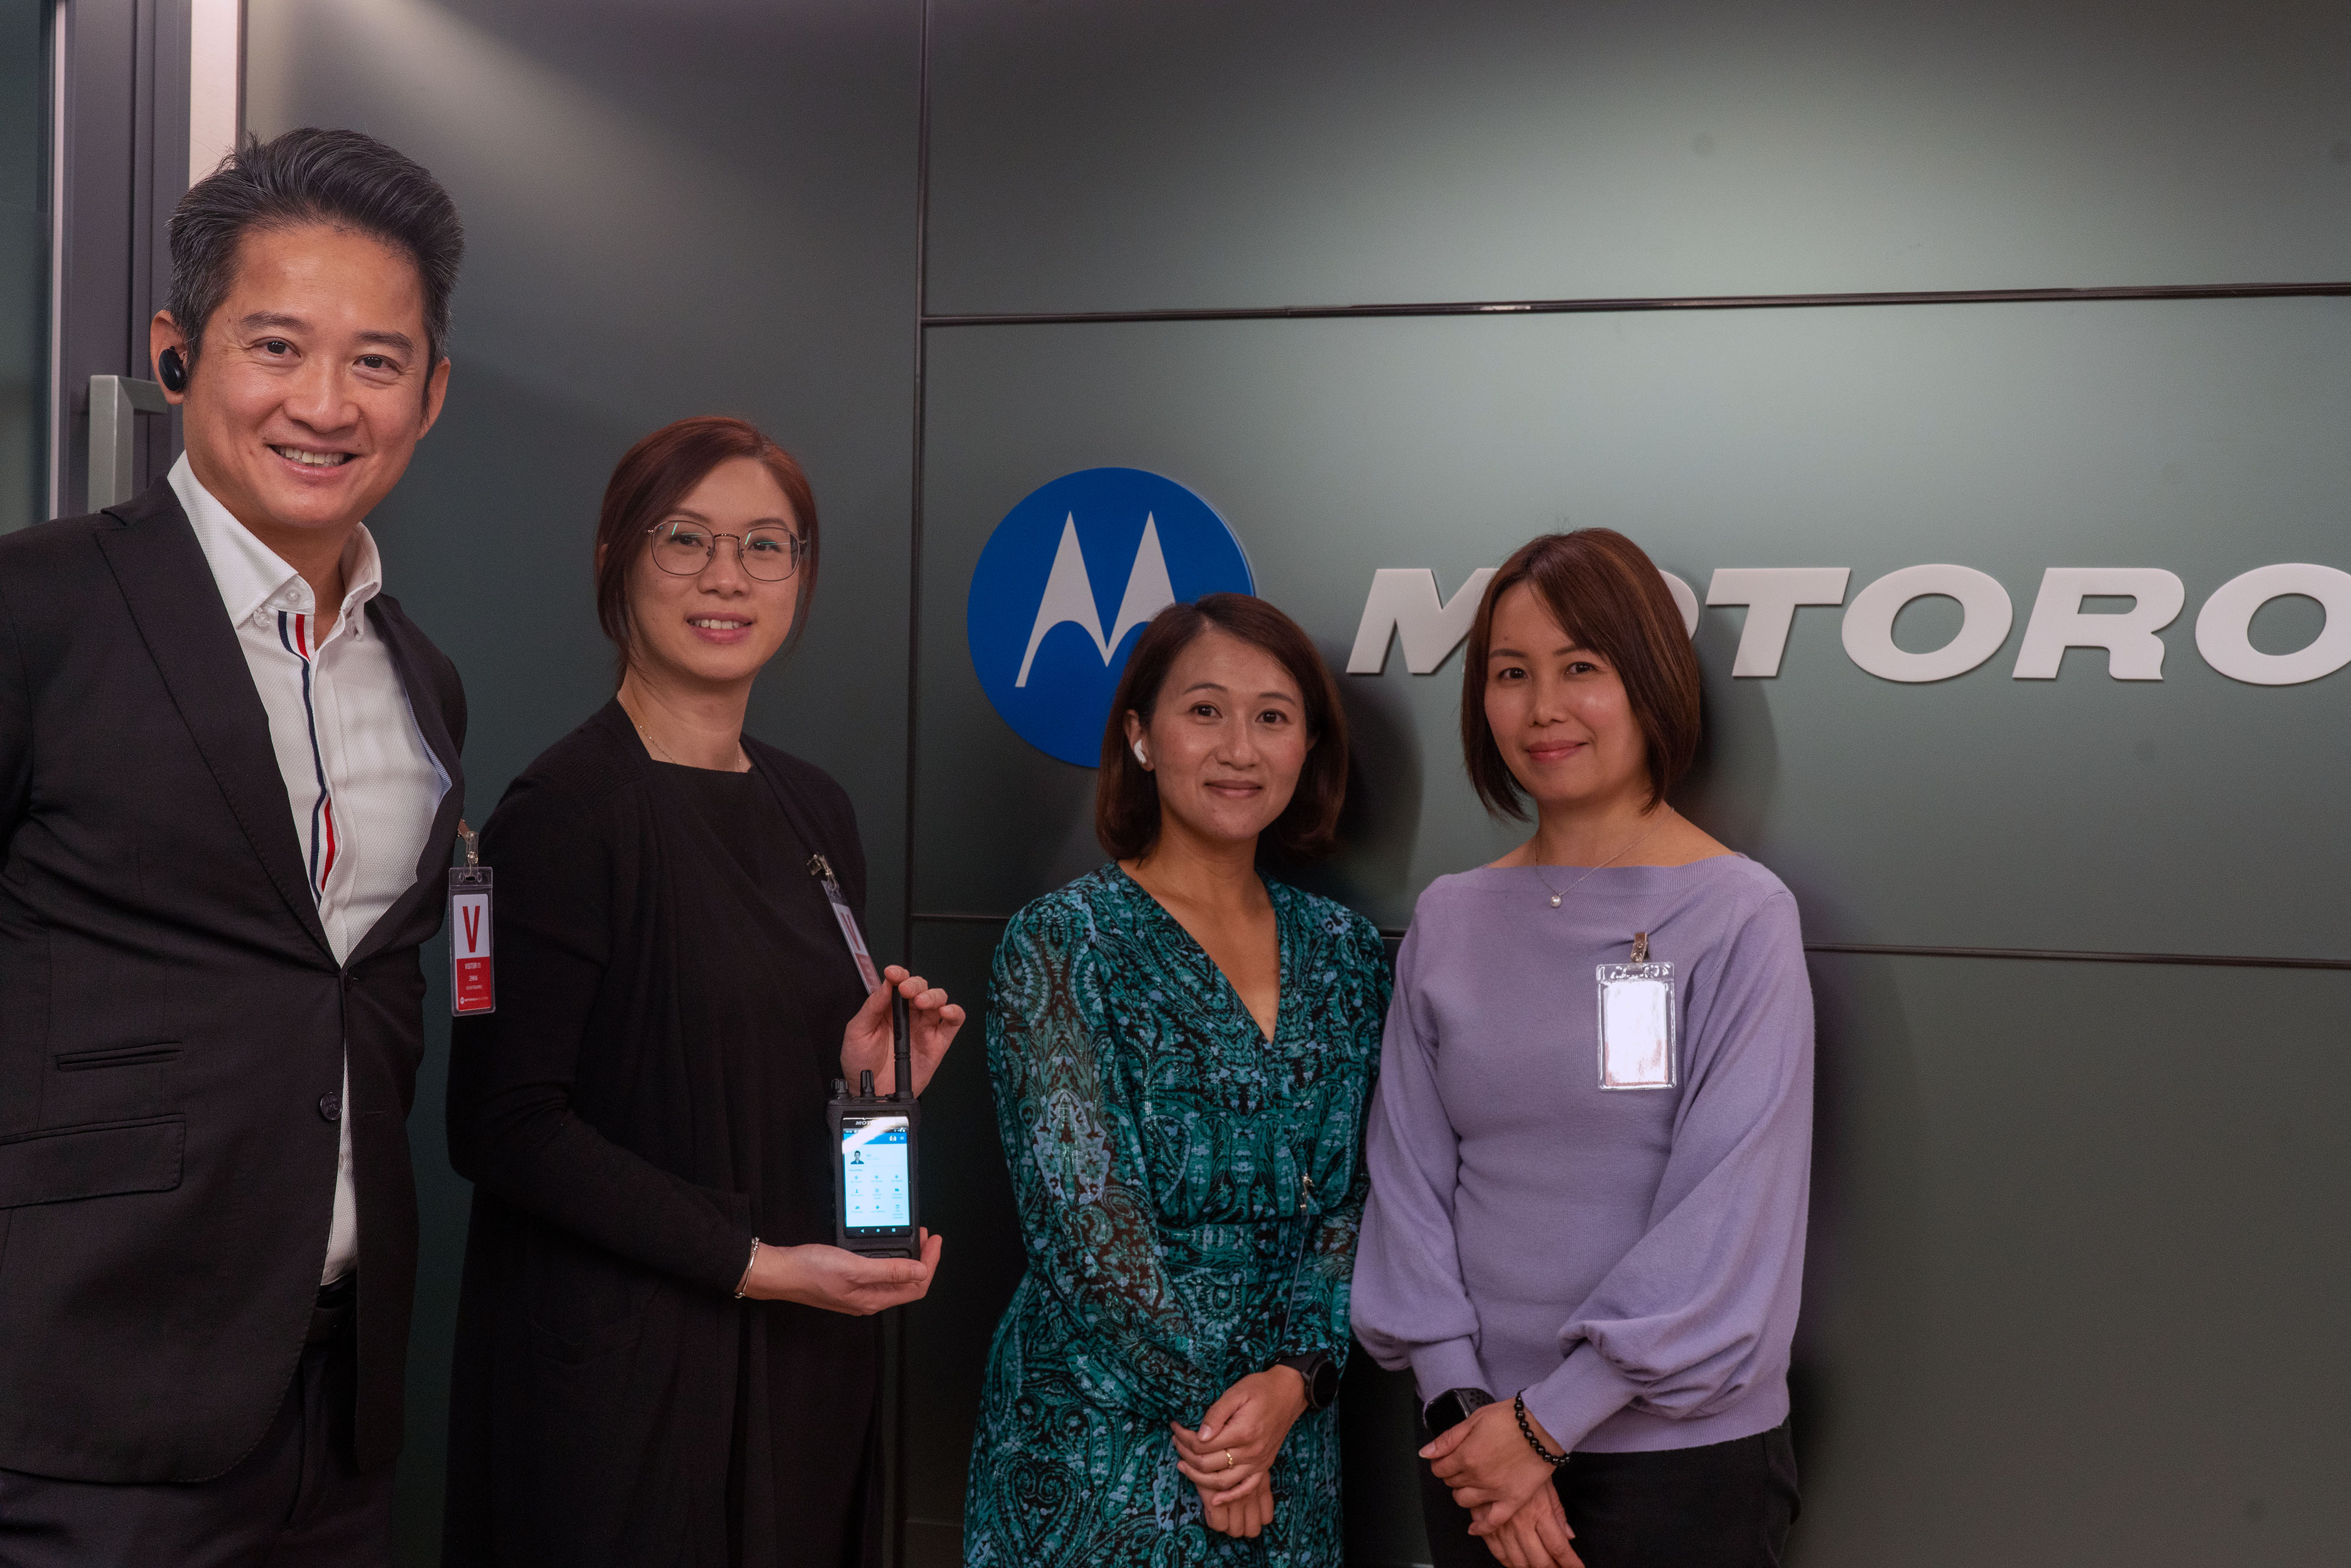 Team Epicor (from the left, Thomas Hung, Hong Kong, Taiwan, Korea, Japan Regional Director, Sherman So, Business Solutions Manager, Cherry Yan, North Asia Senior Marketing Manager and Gina Au, Senior Business Solutions Manager) won Motorola Solutions Hong Kong App Challenge Warehouse category.